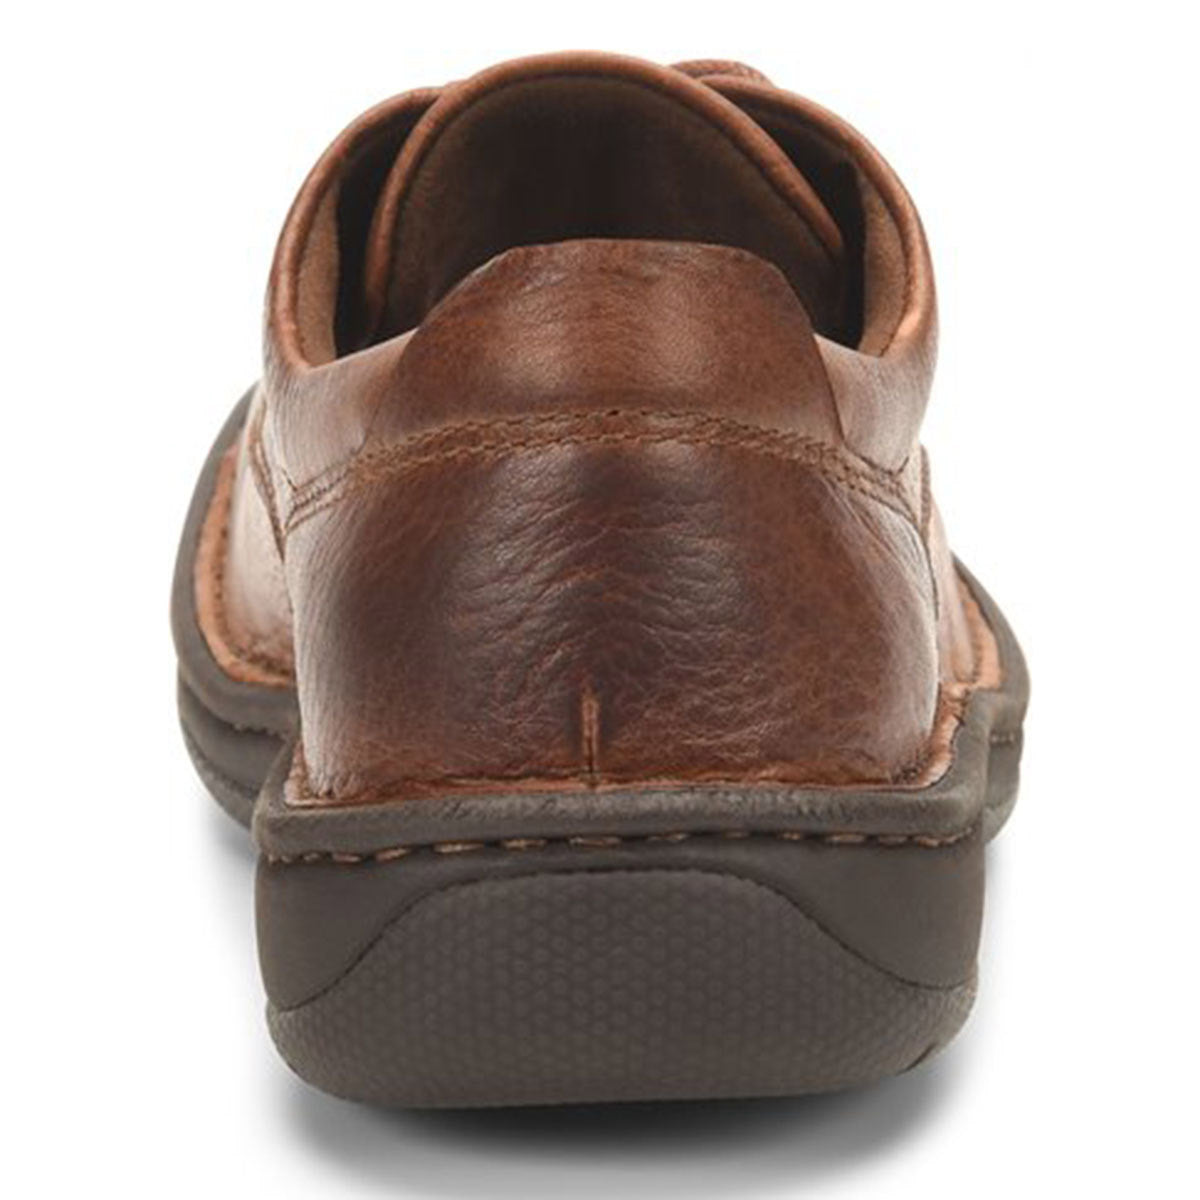 Rear view of a pair of Born Hutchins III Dark Tan full grain leather loafers with white stitching and rubber soles, isolated on a white background.